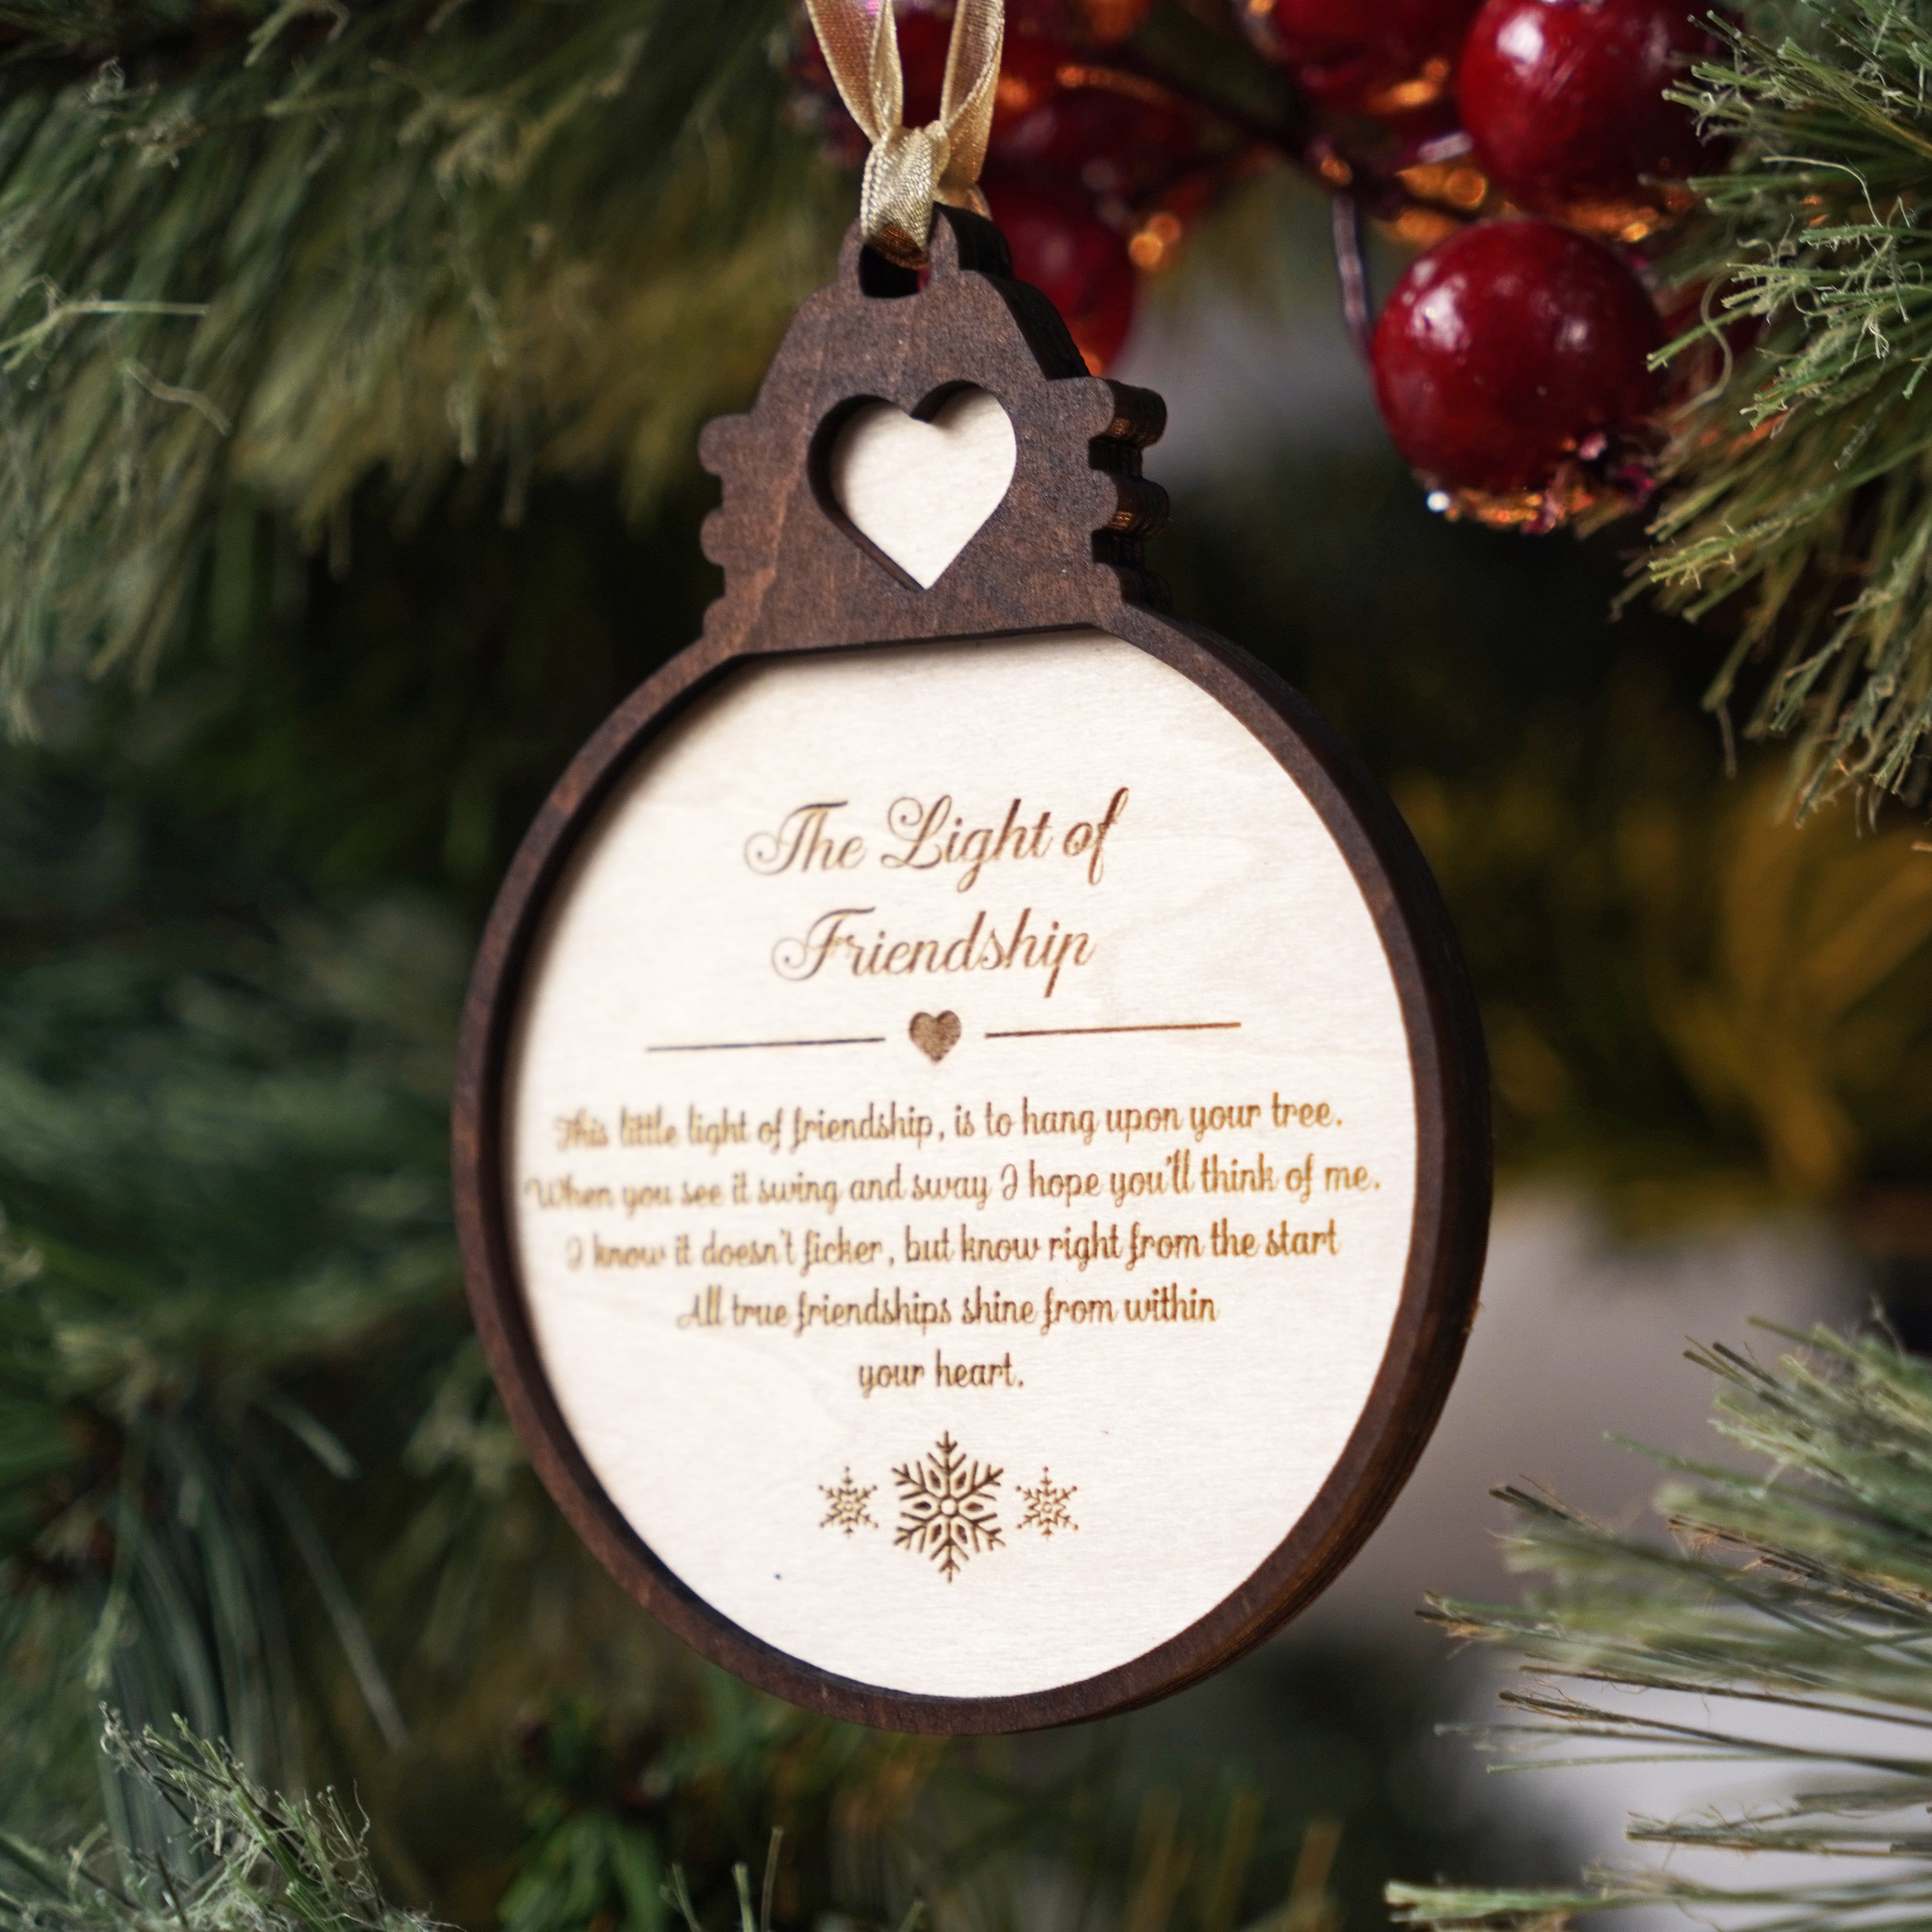 The Light of Friendship Great gift for Coworkers, Friends, Neighbors, Family Wood Rustic Style Christmas Ornament